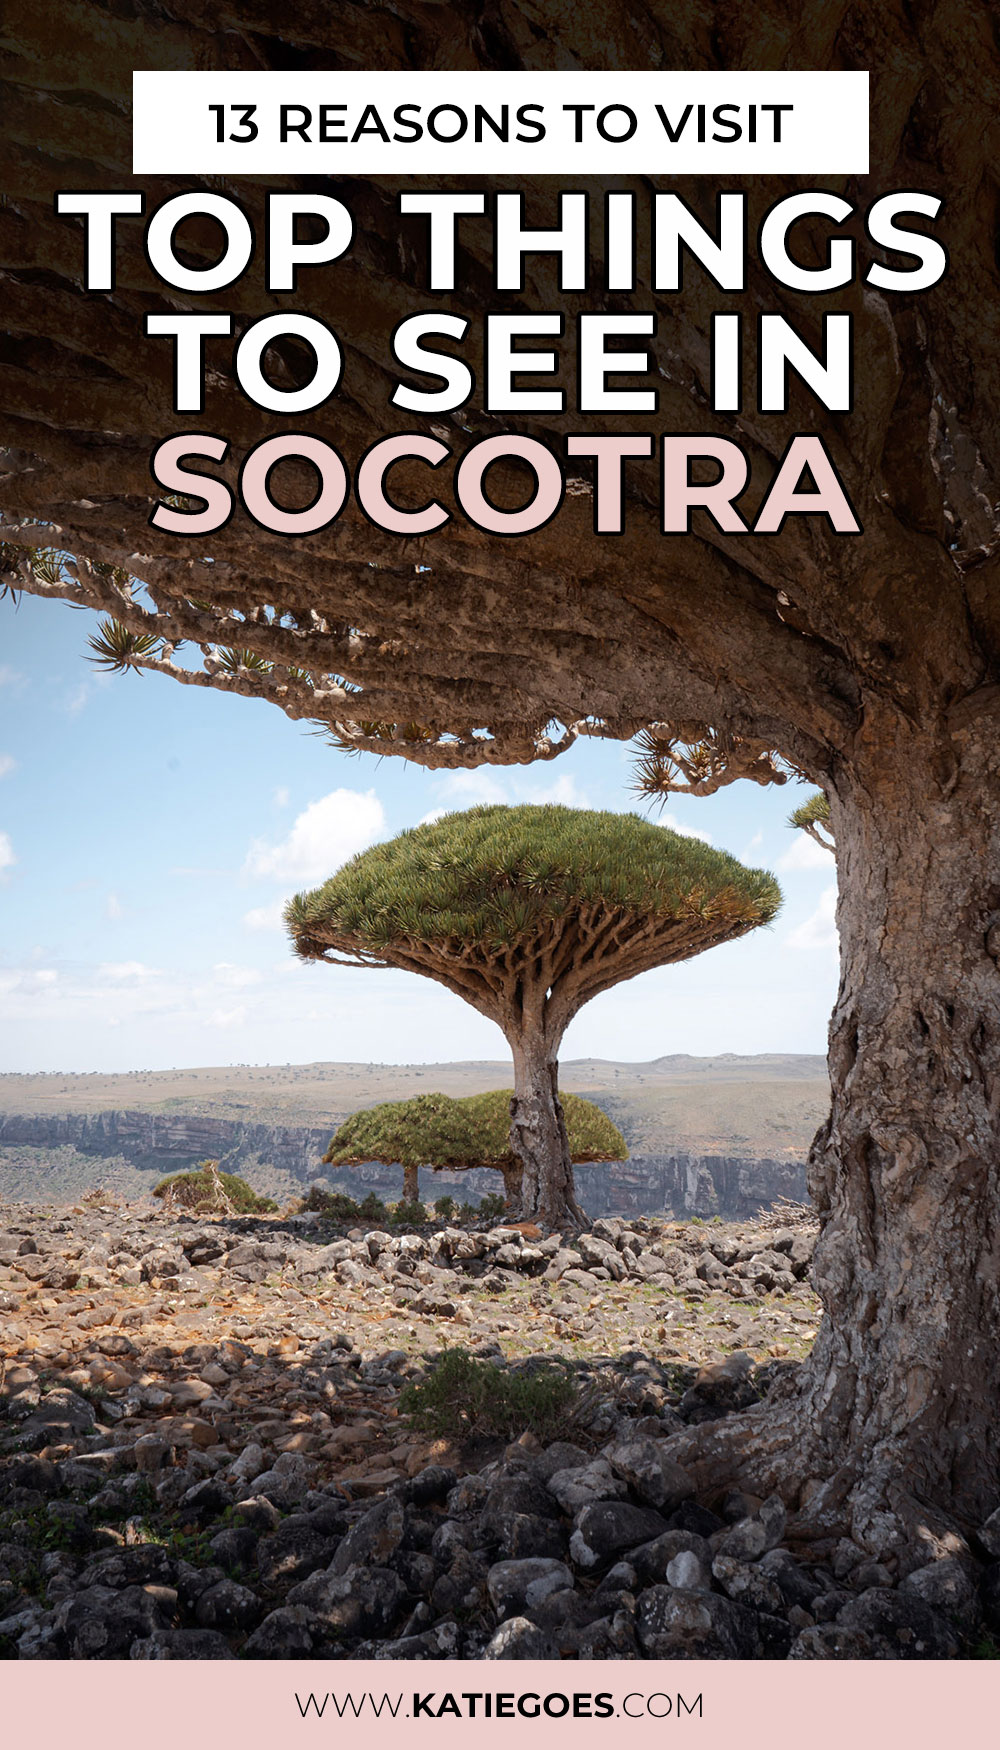 13 Reasons to Visit: Best Things to See in Socotra